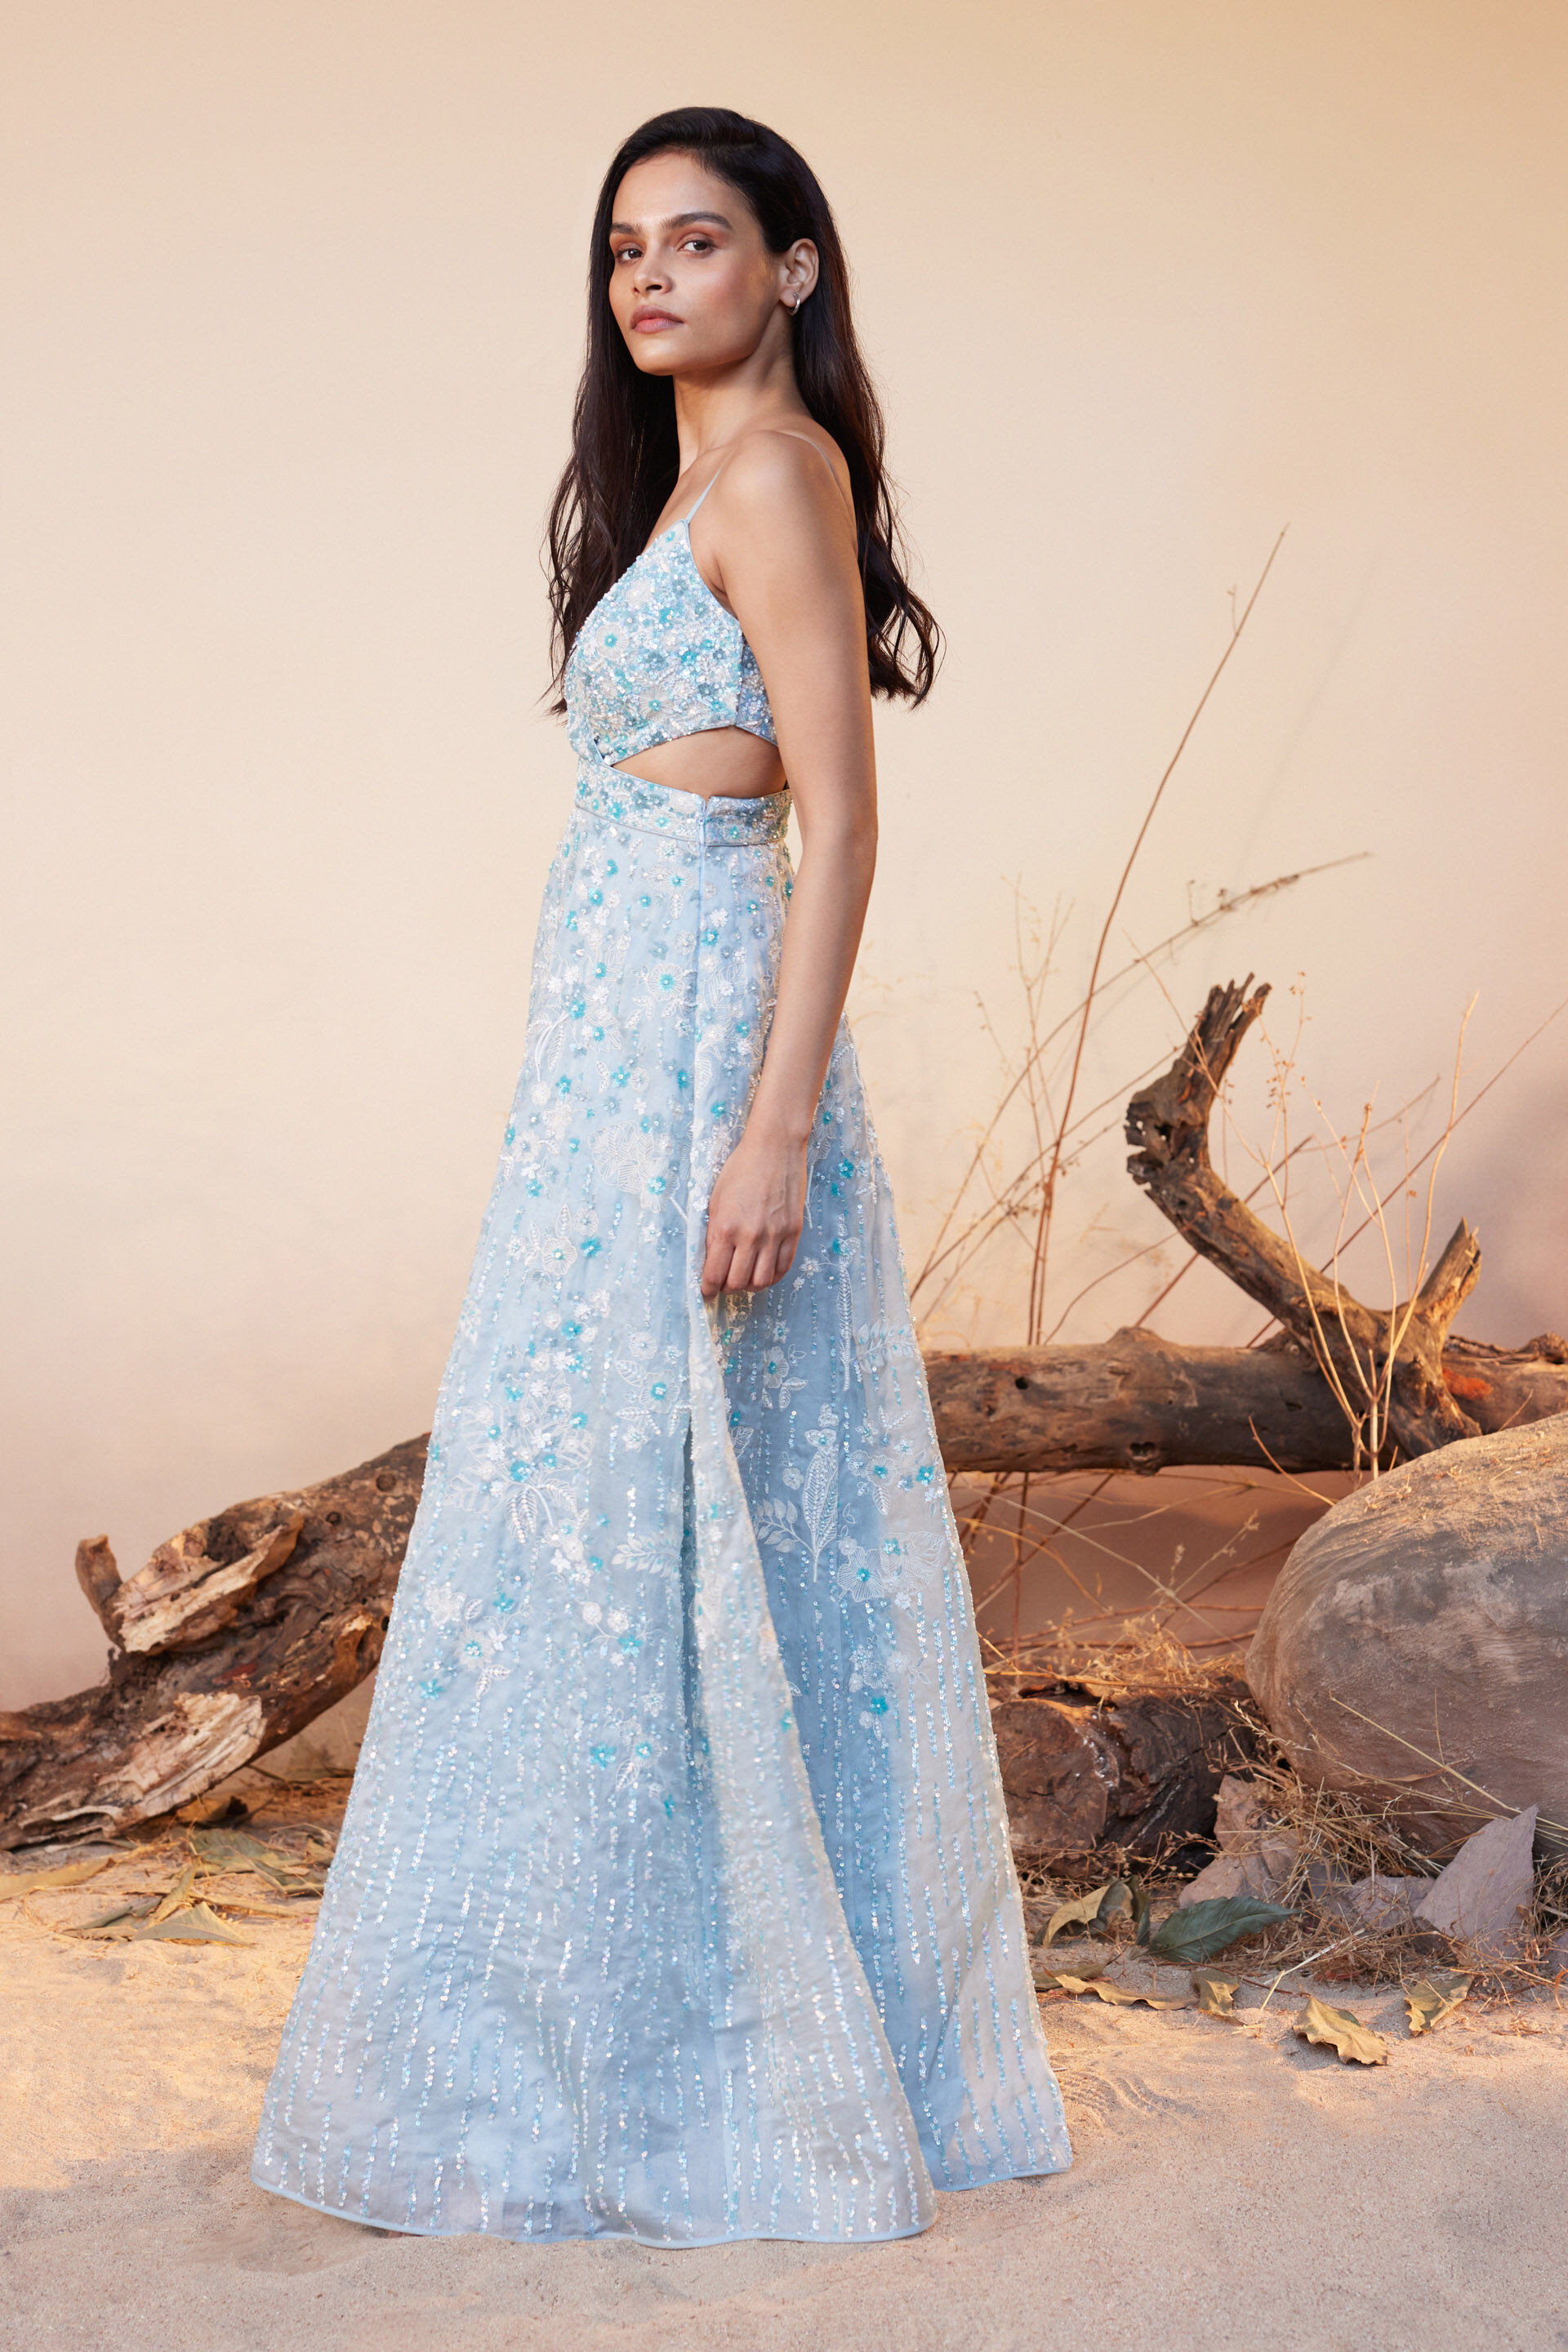 Anita Dongre Launches Summer23